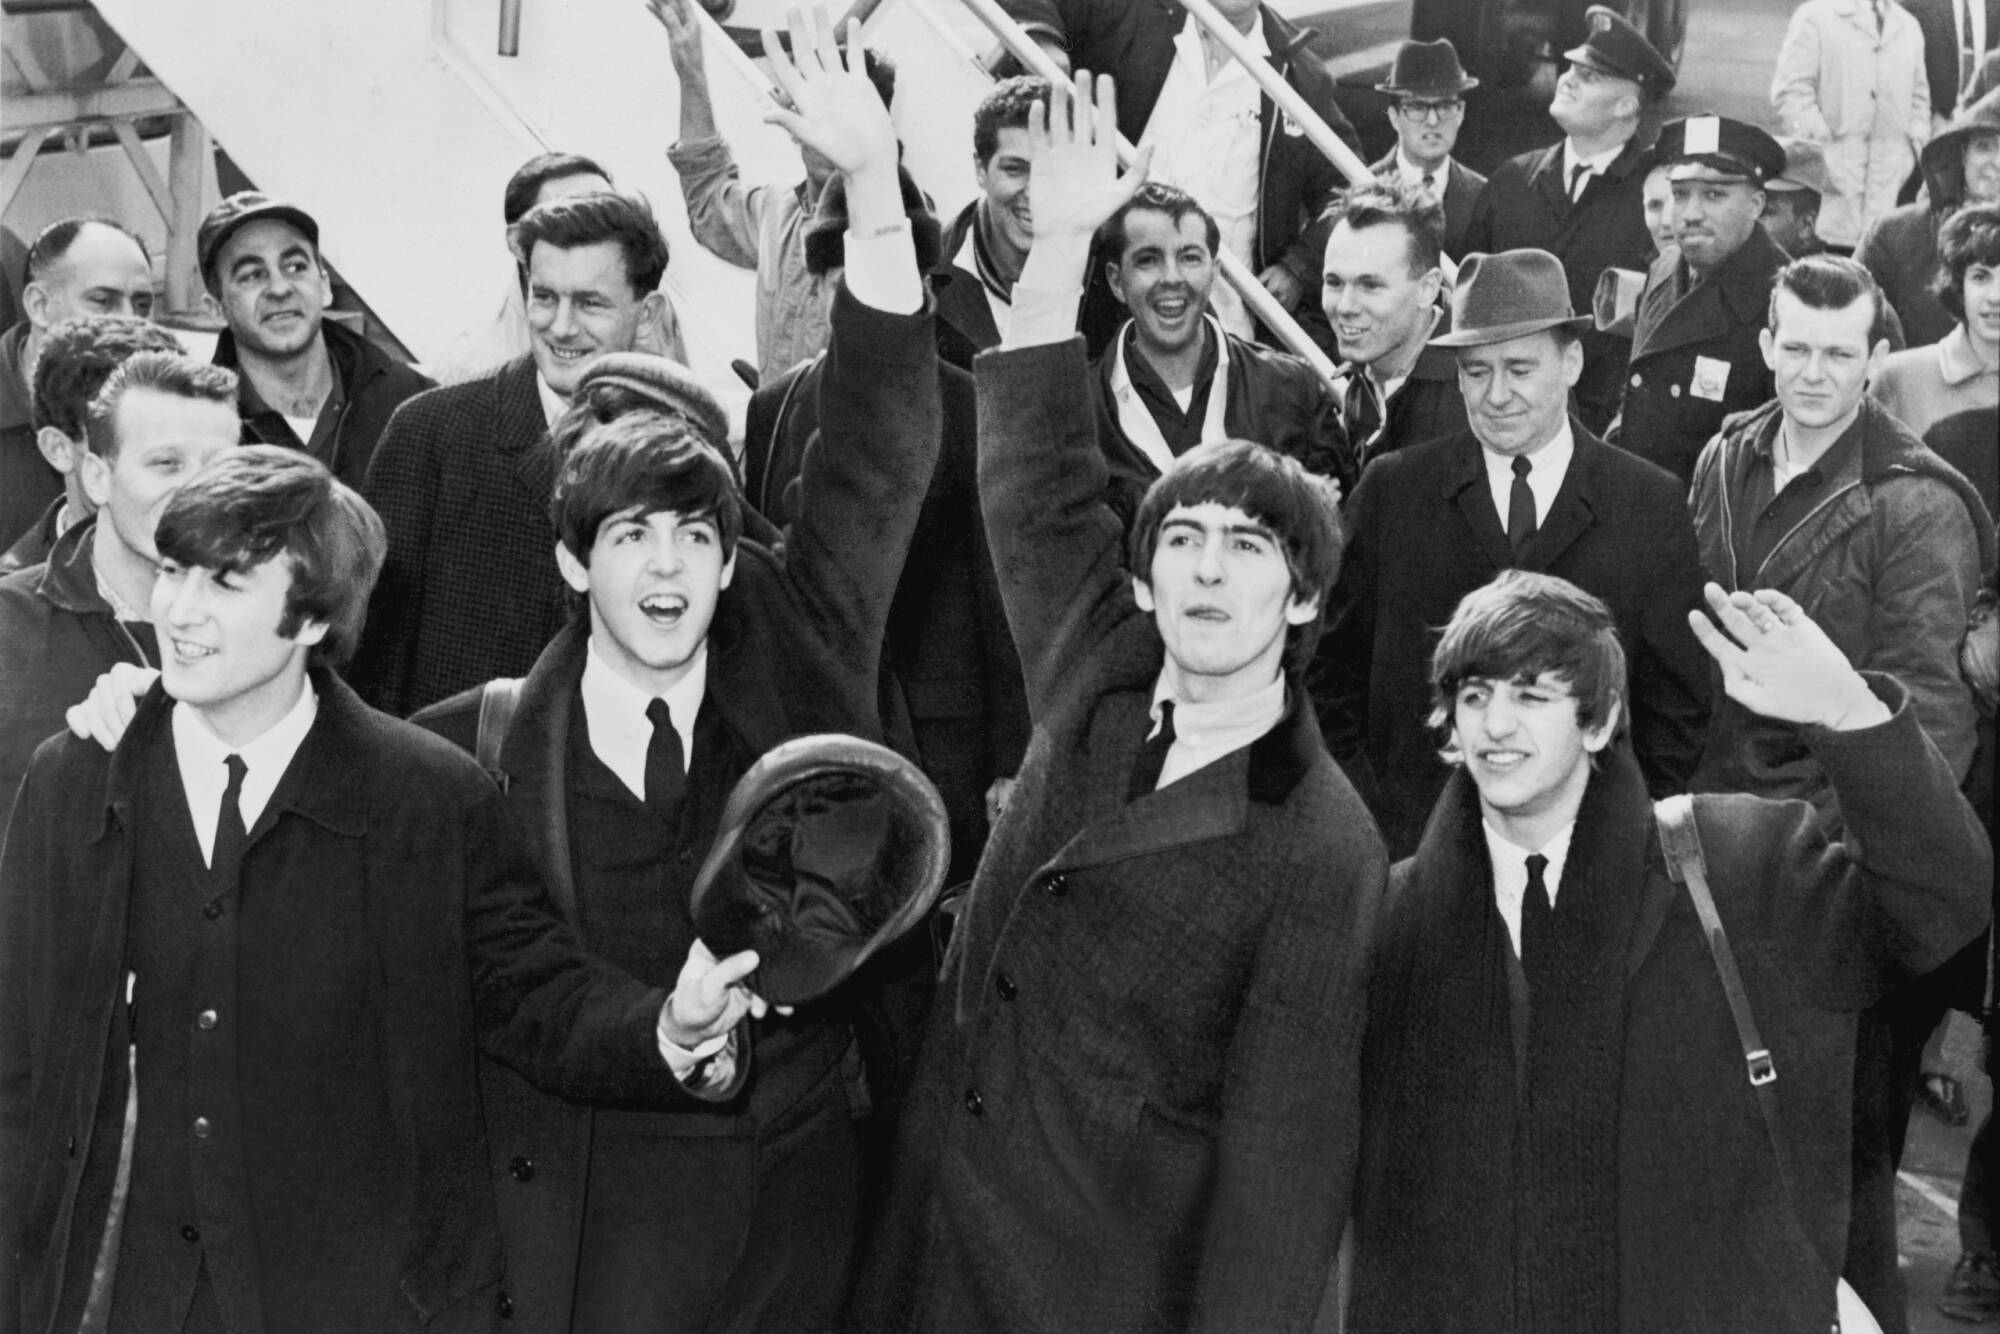 The Beatles arrive in New York in 1964. On Feb. 9 of that year, the Beatles made their first television appearance in North America. (UPI photo via Wikimedia Commons)